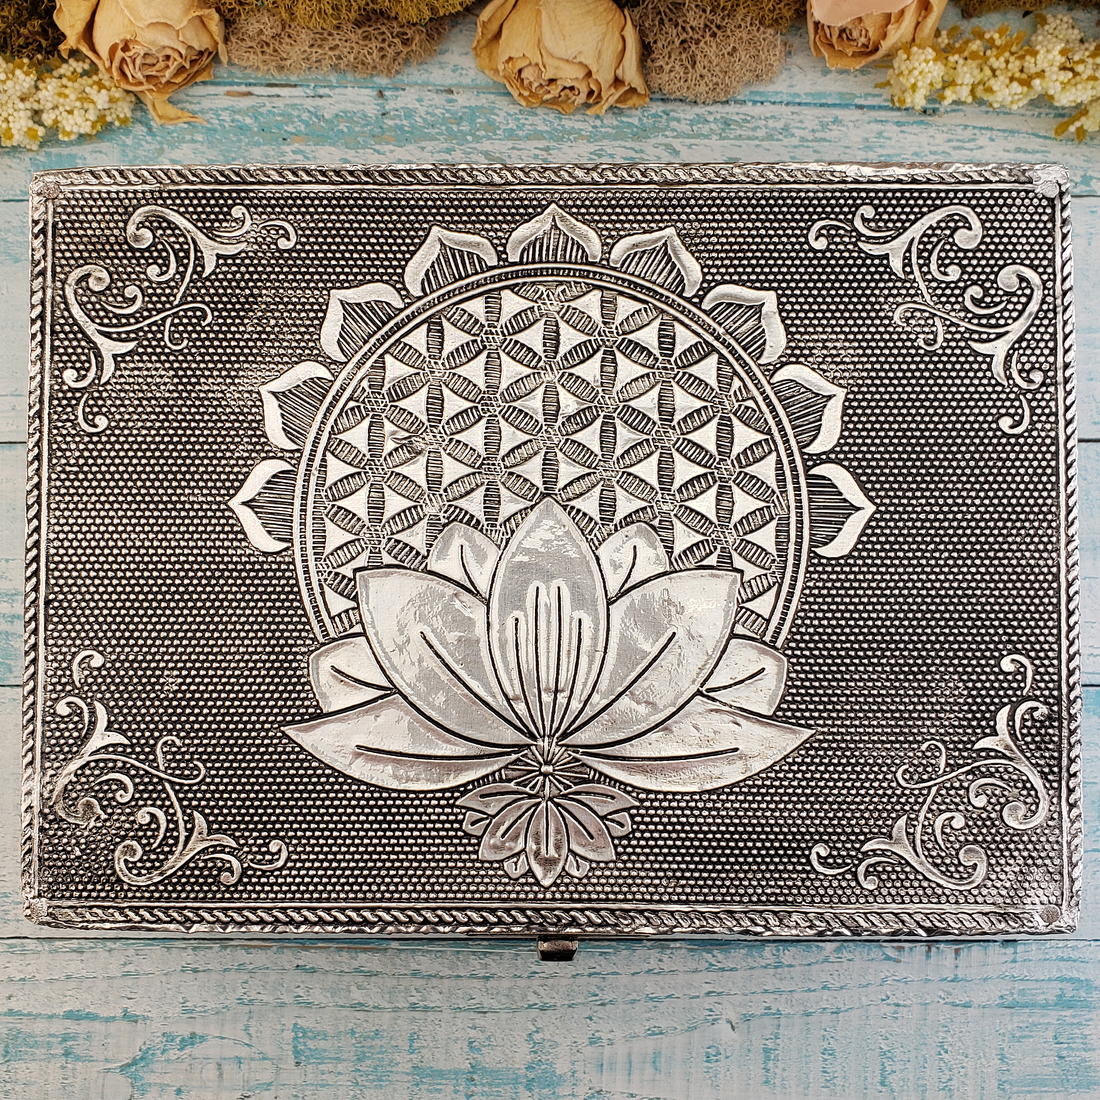 Lotus Flower of Life Embossed Metal Over Wooden Decorative Storage Box - 6.75 x 4.75 inches